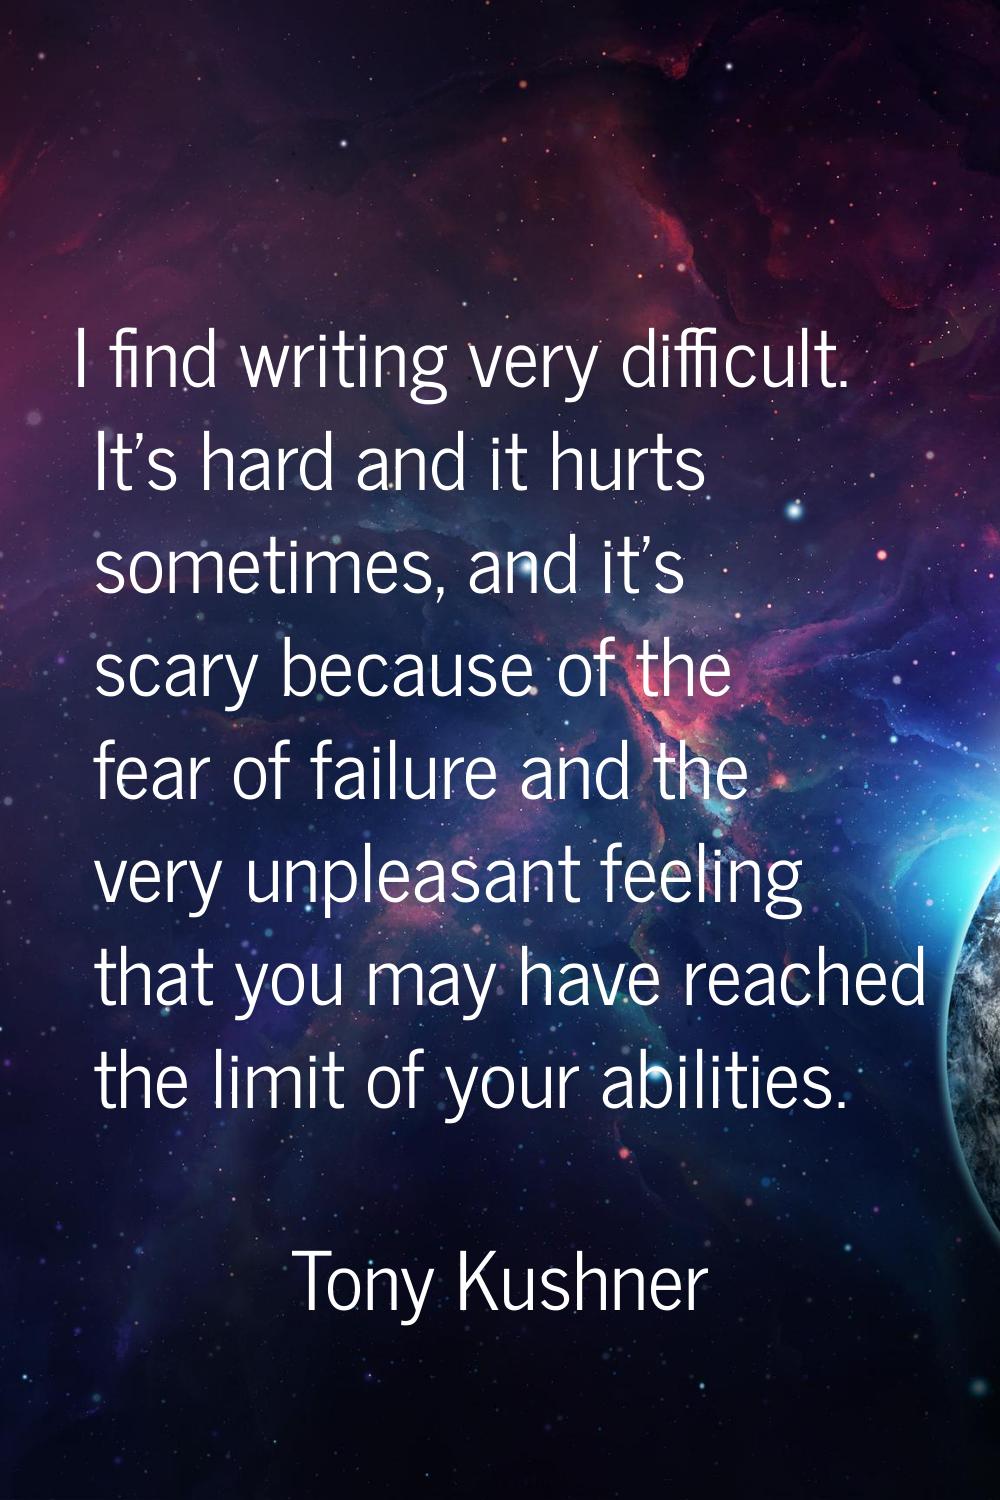 I find writing very difficult. It's hard and it hurts sometimes, and it's scary because of the fear